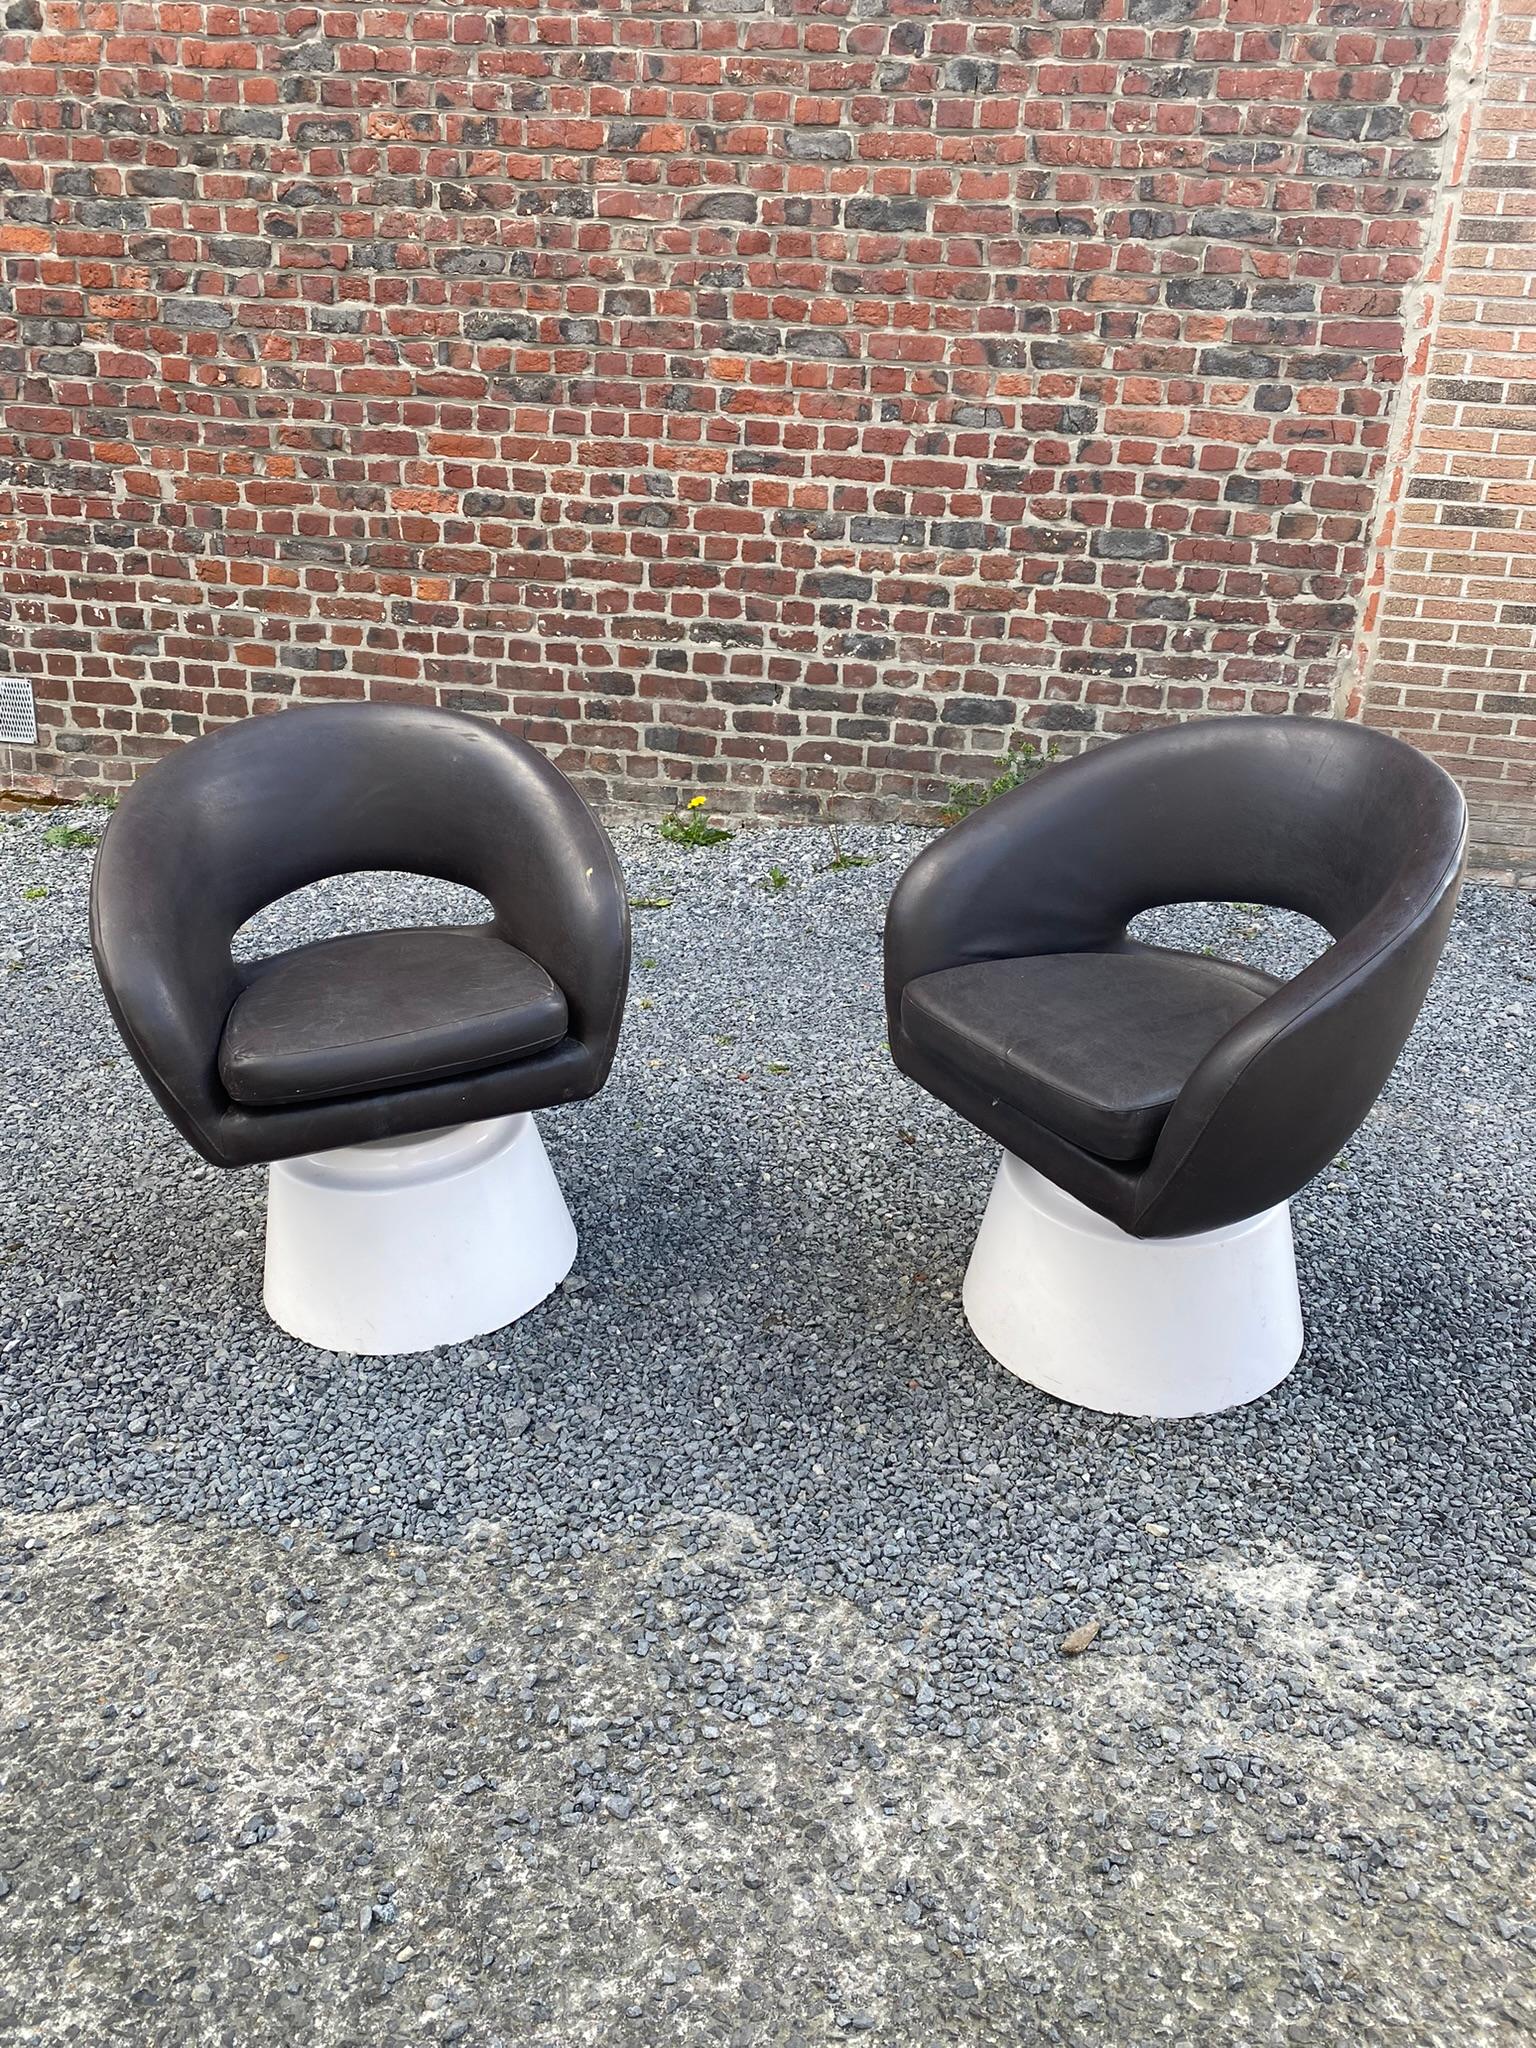 Fun vintage swivel armchairs circa 1960 in fiberglass and faux leather;
maybe prototypes.